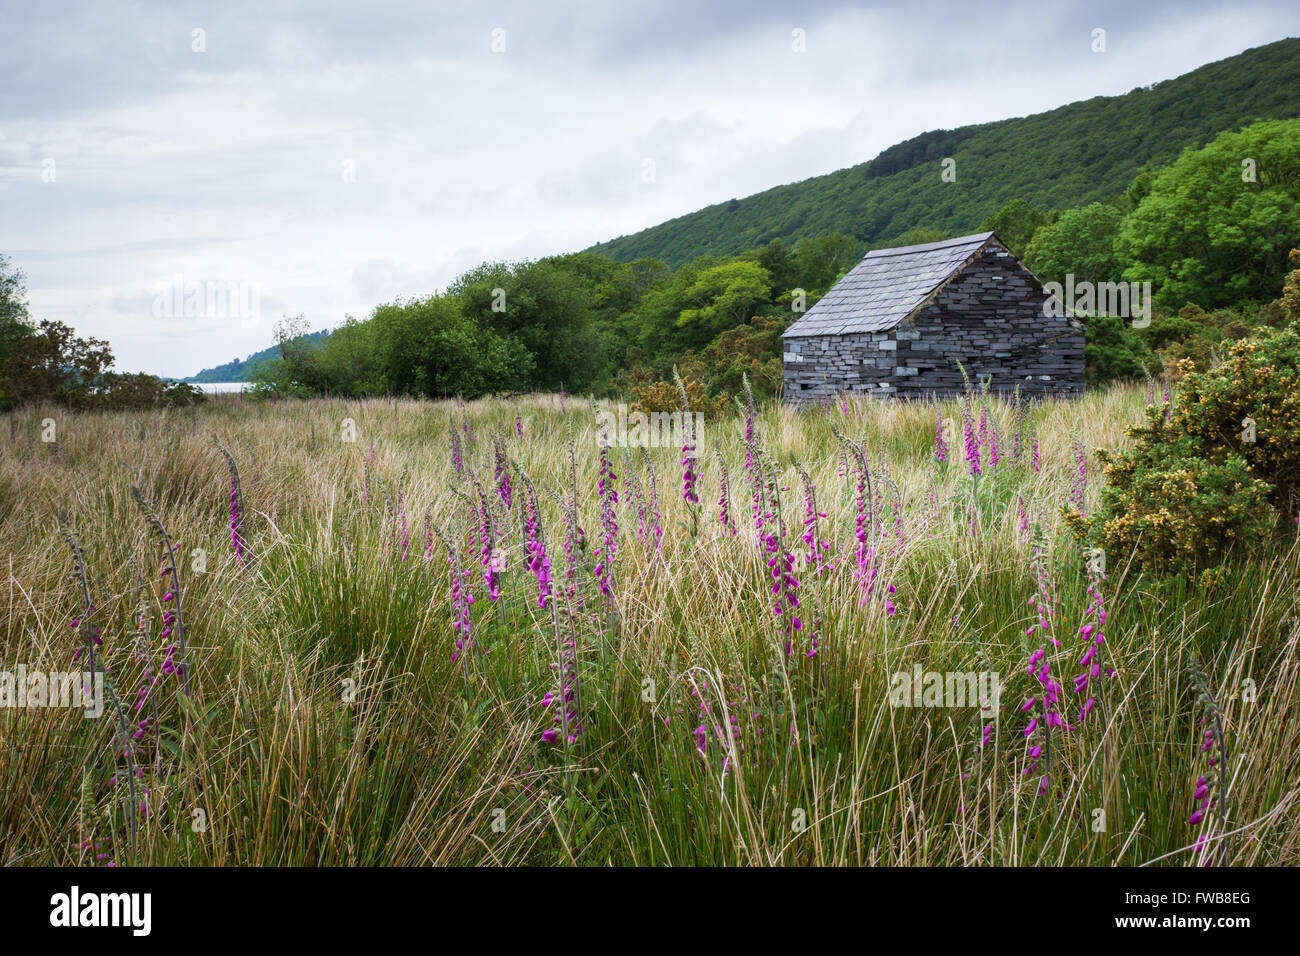 Stone and slate cabin in field in Wales with wildflowers in foreground Stock Photo